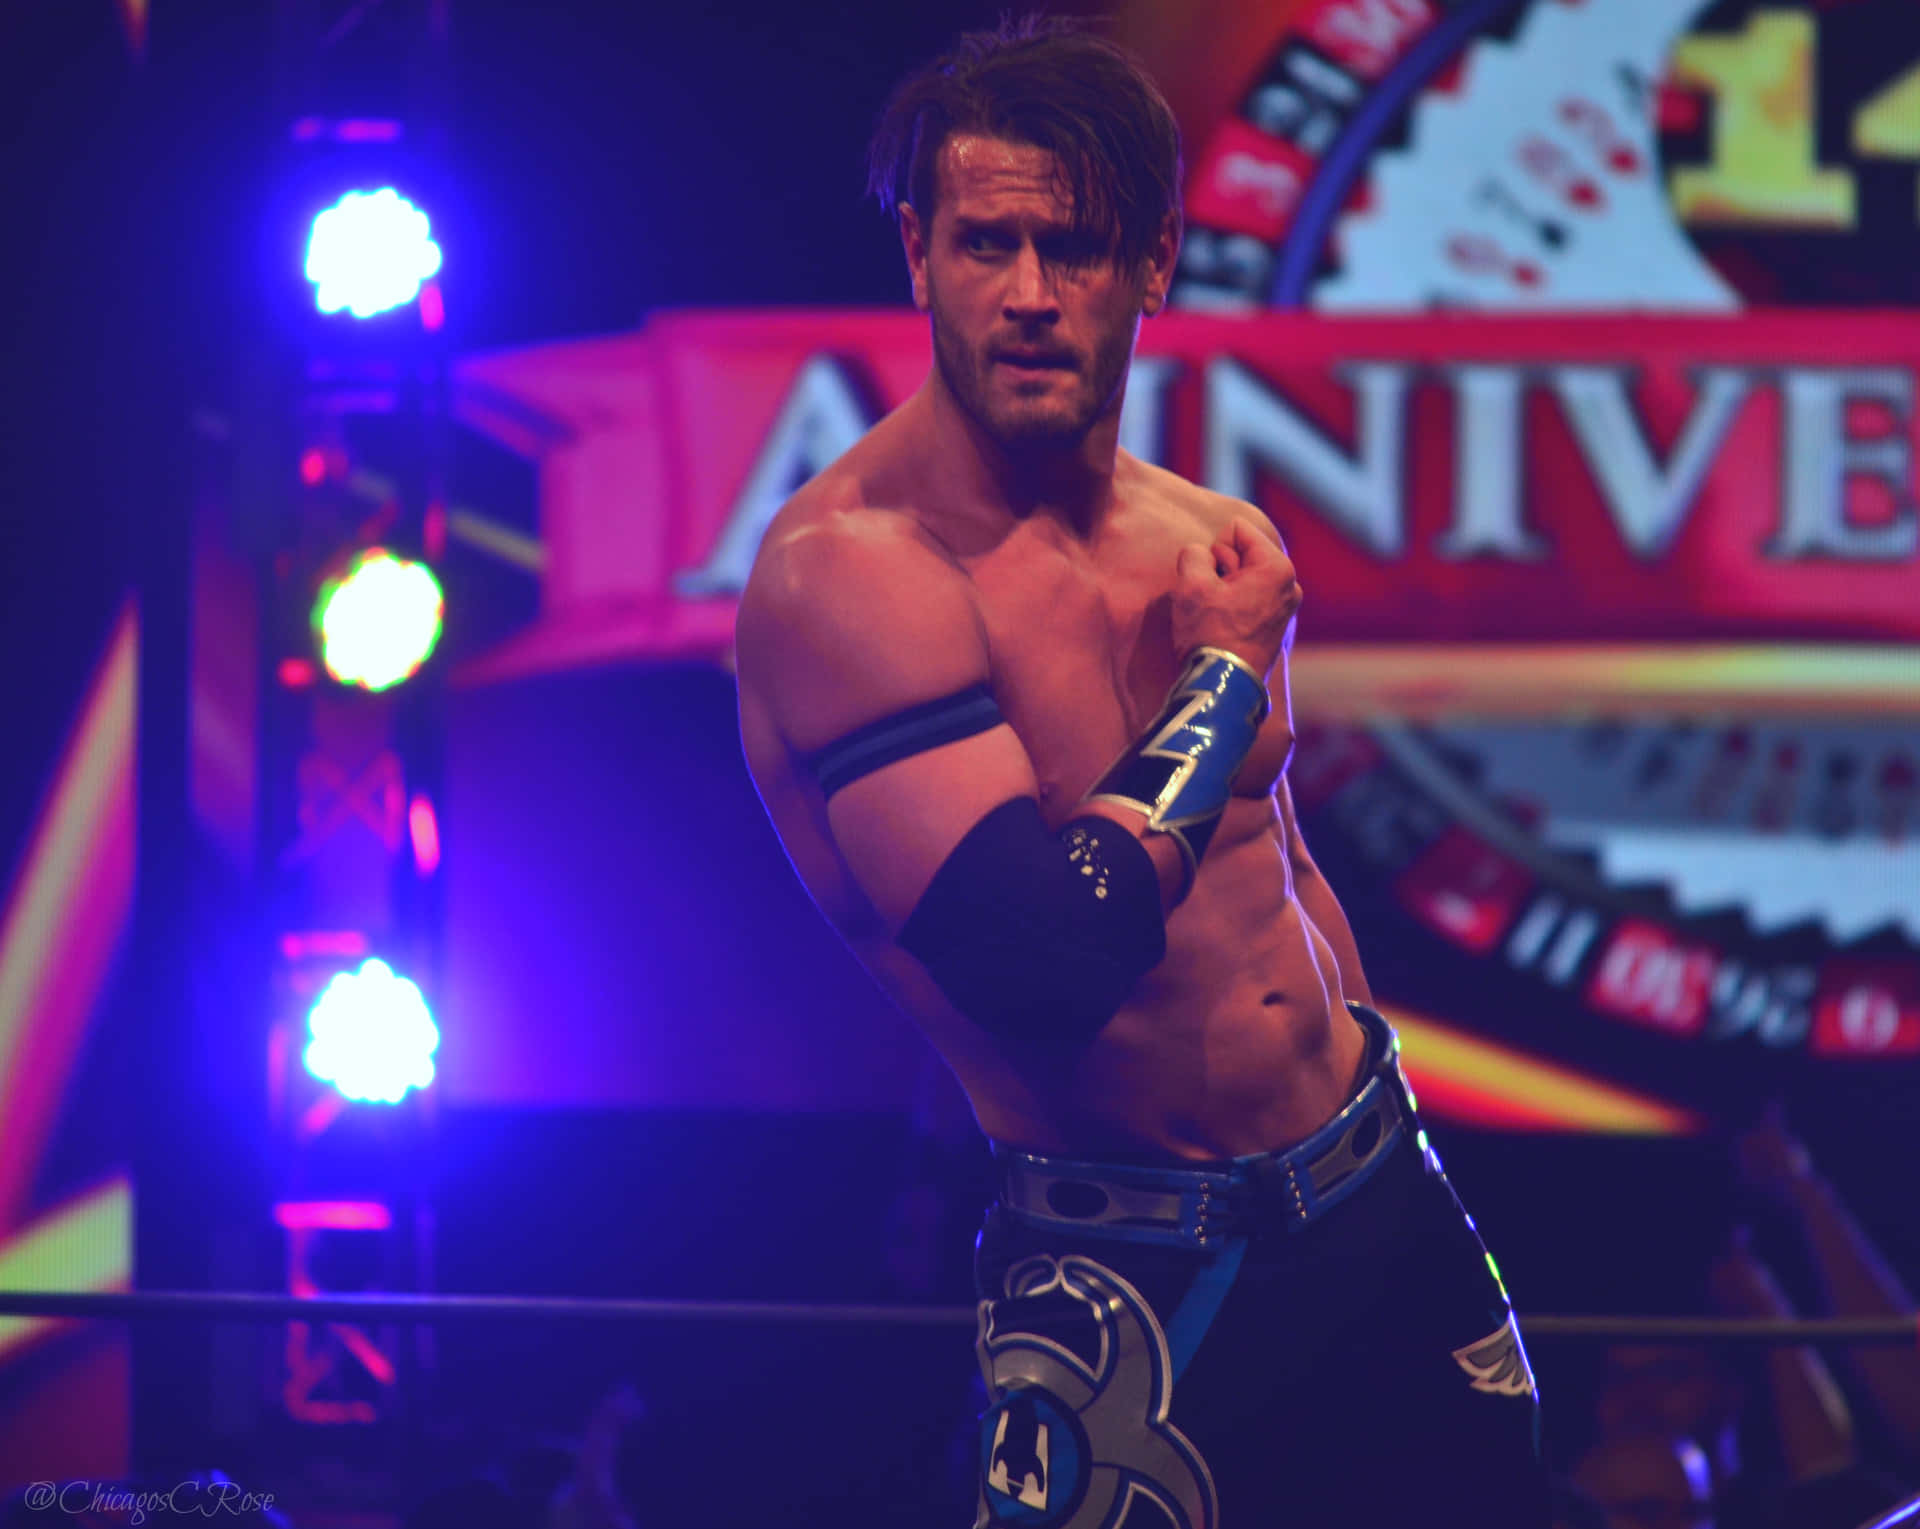 Alex Shelley dominating at Impact Wrestling Anniversary Event Wallpaper